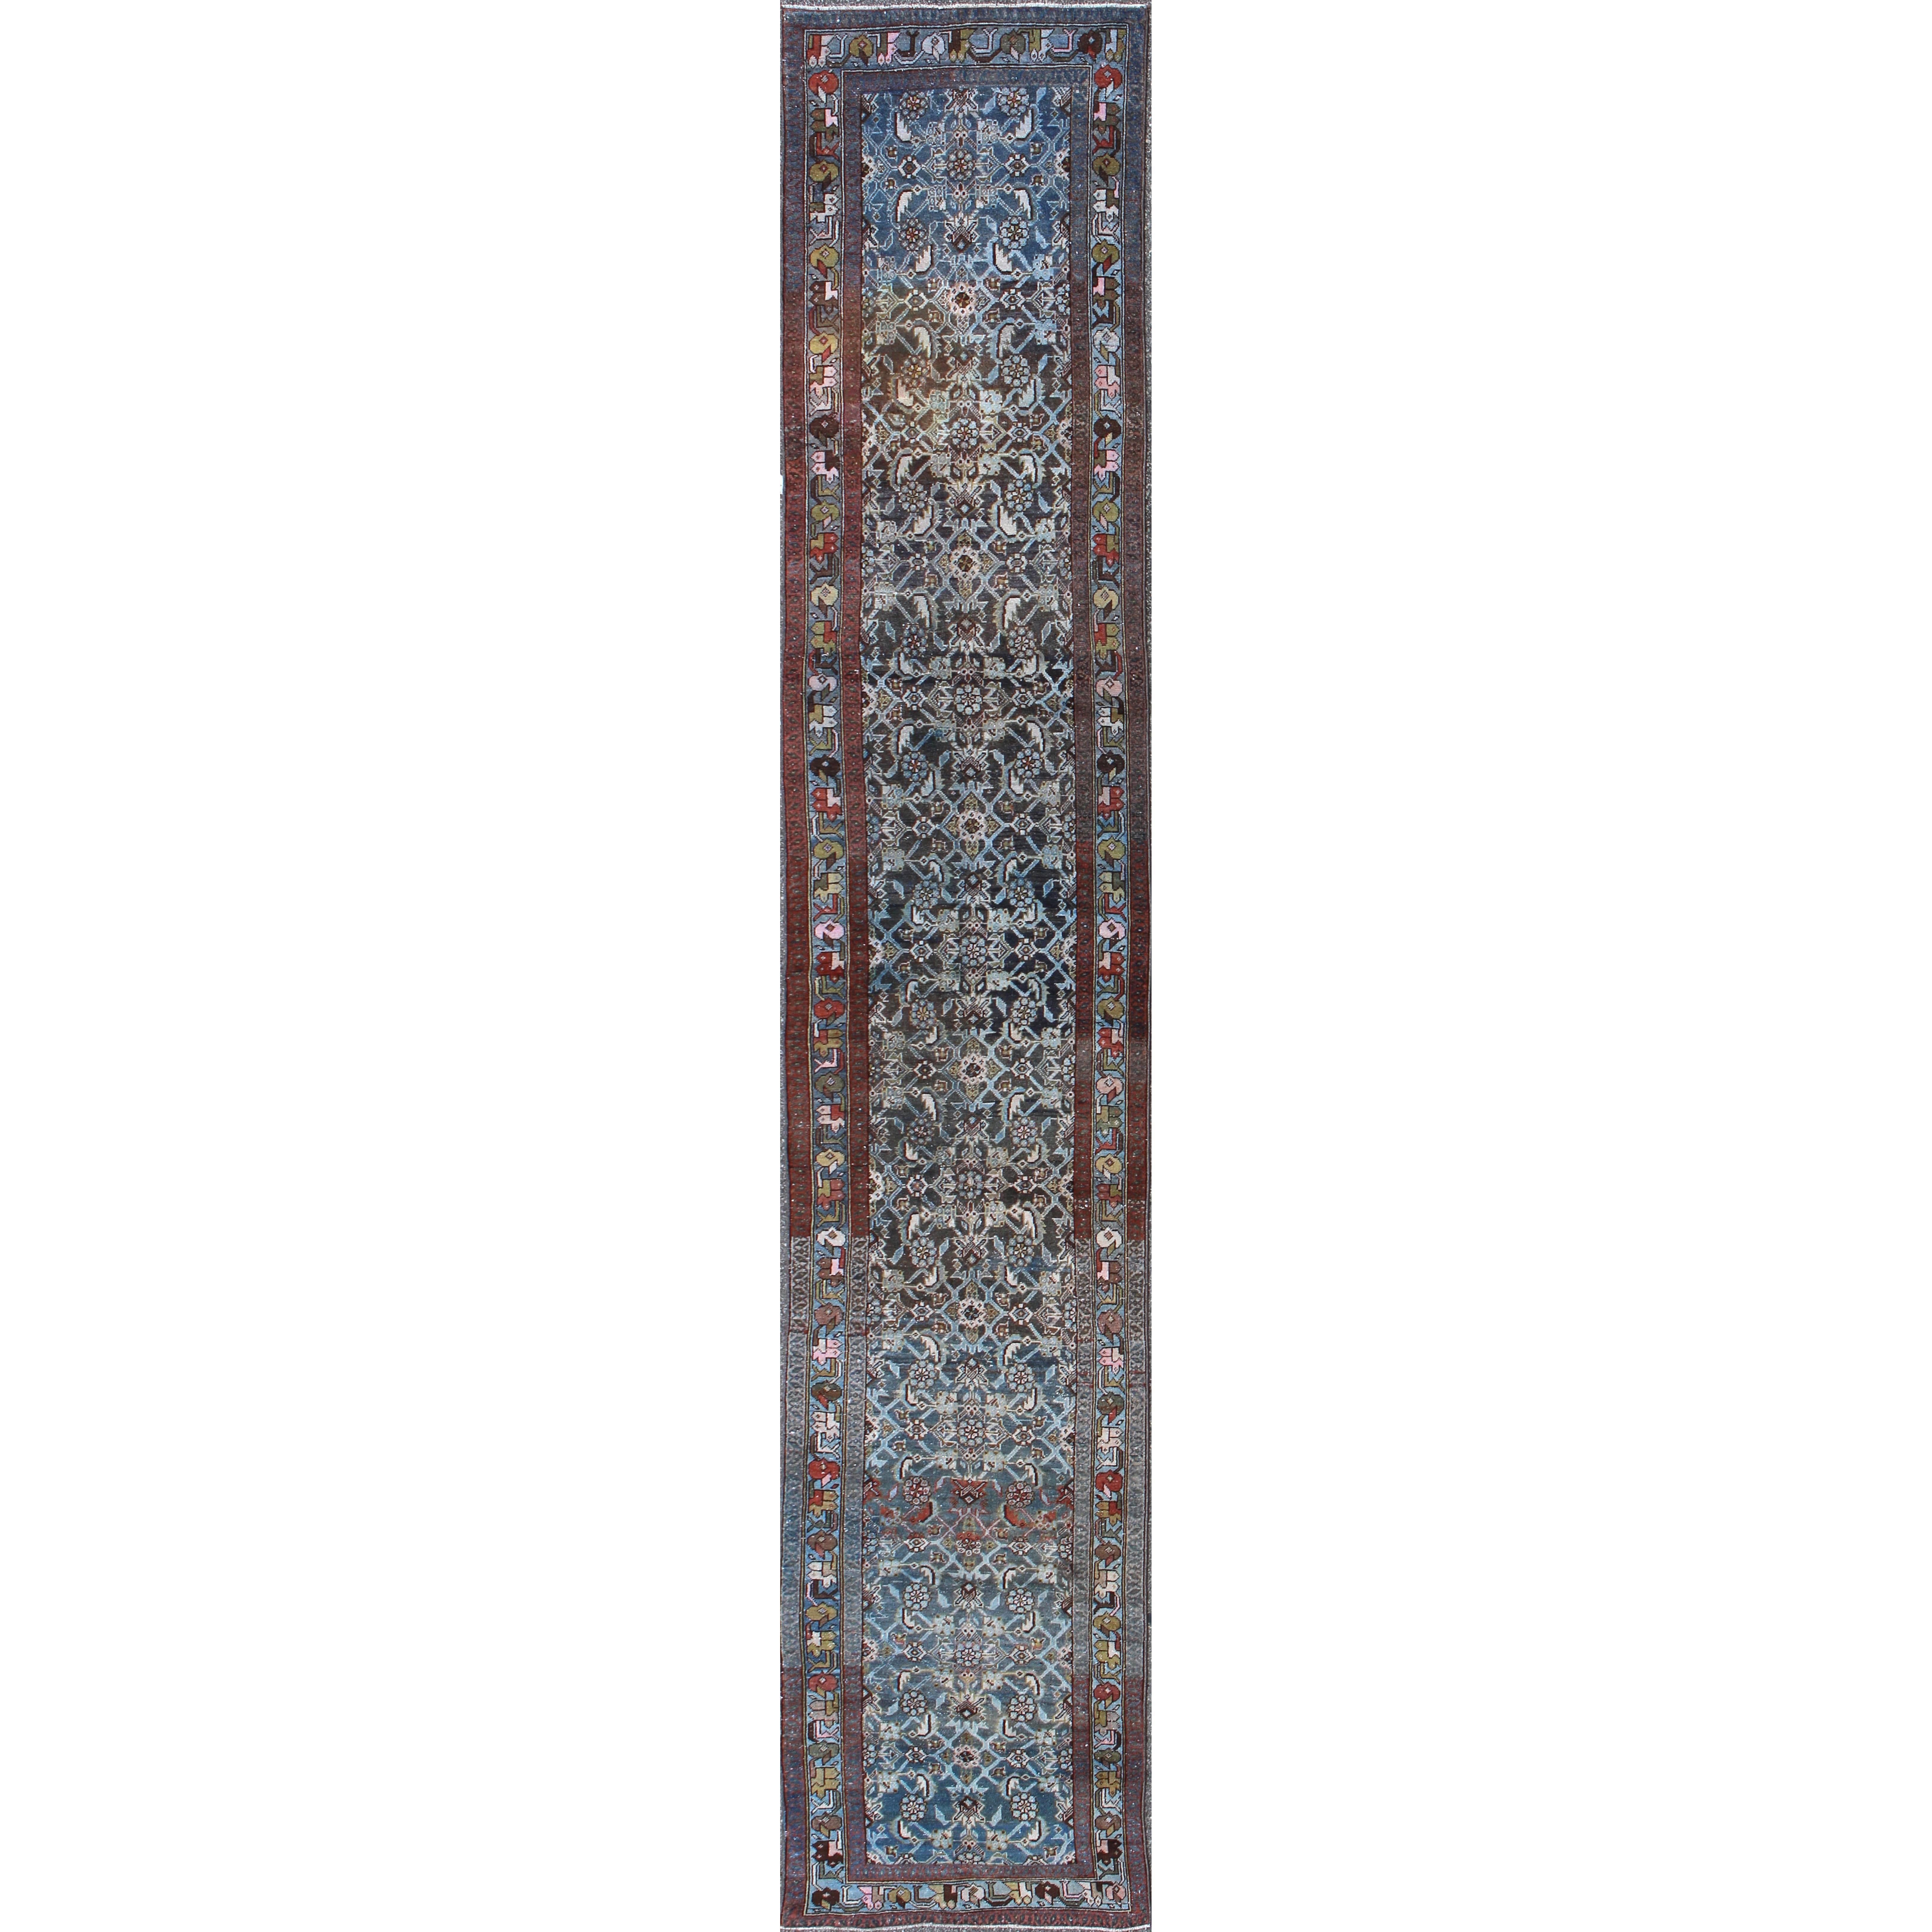 Early 20th Century Very Long Kurdish Runner with Dark/Light Blue, Red and Taupe